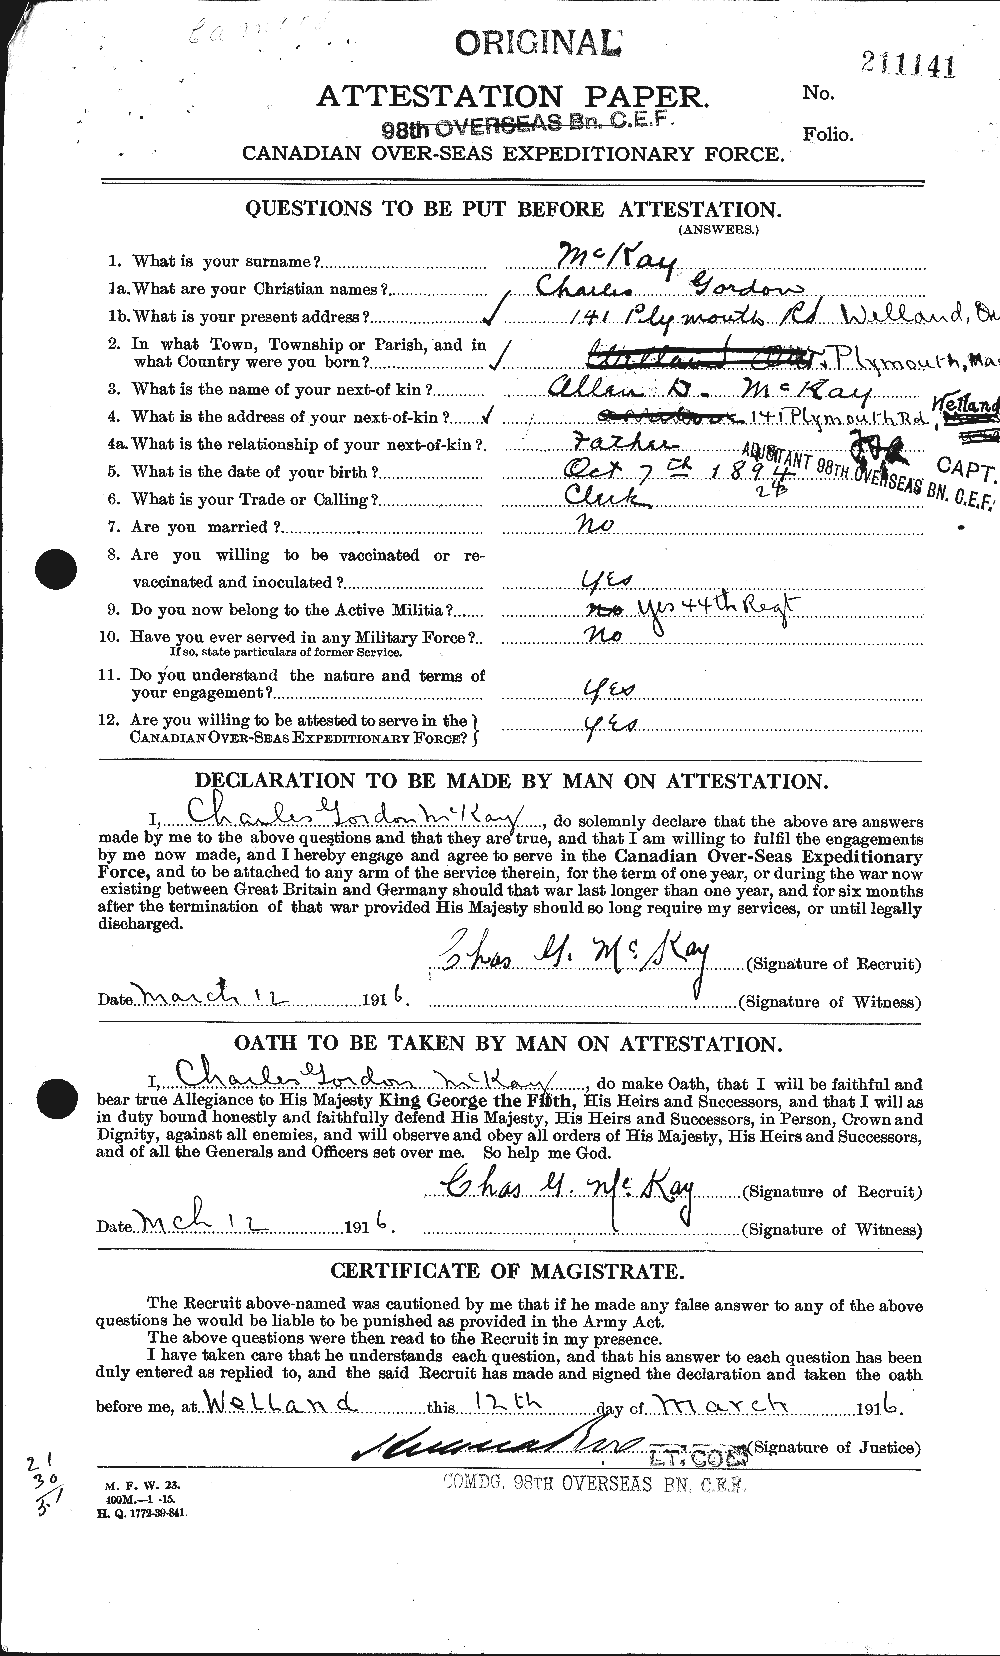 Personnel Records of the First World War - CEF 531065a